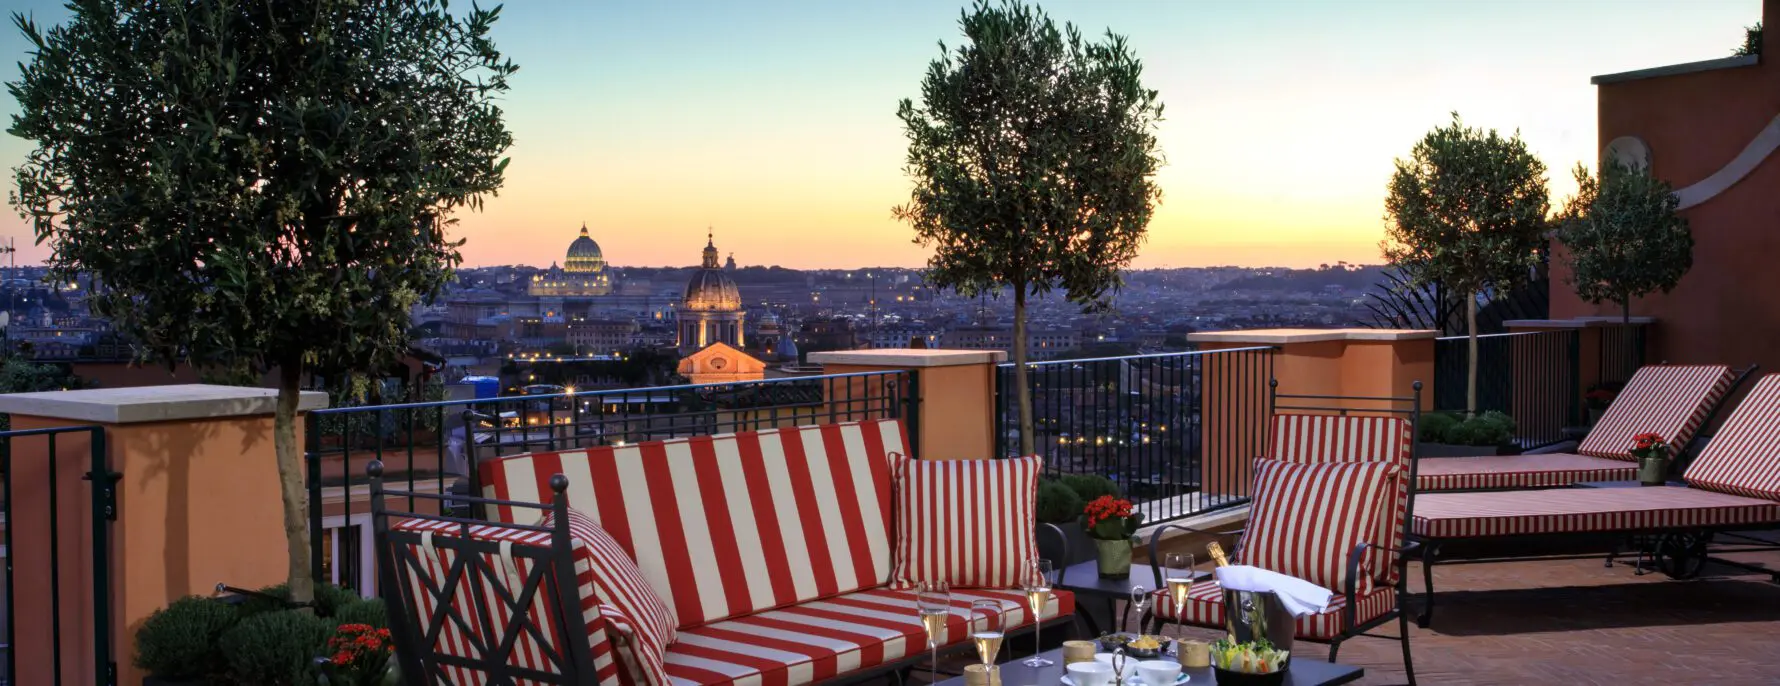 Nest Italy: Hotel atop the Spanish Steps in Rome